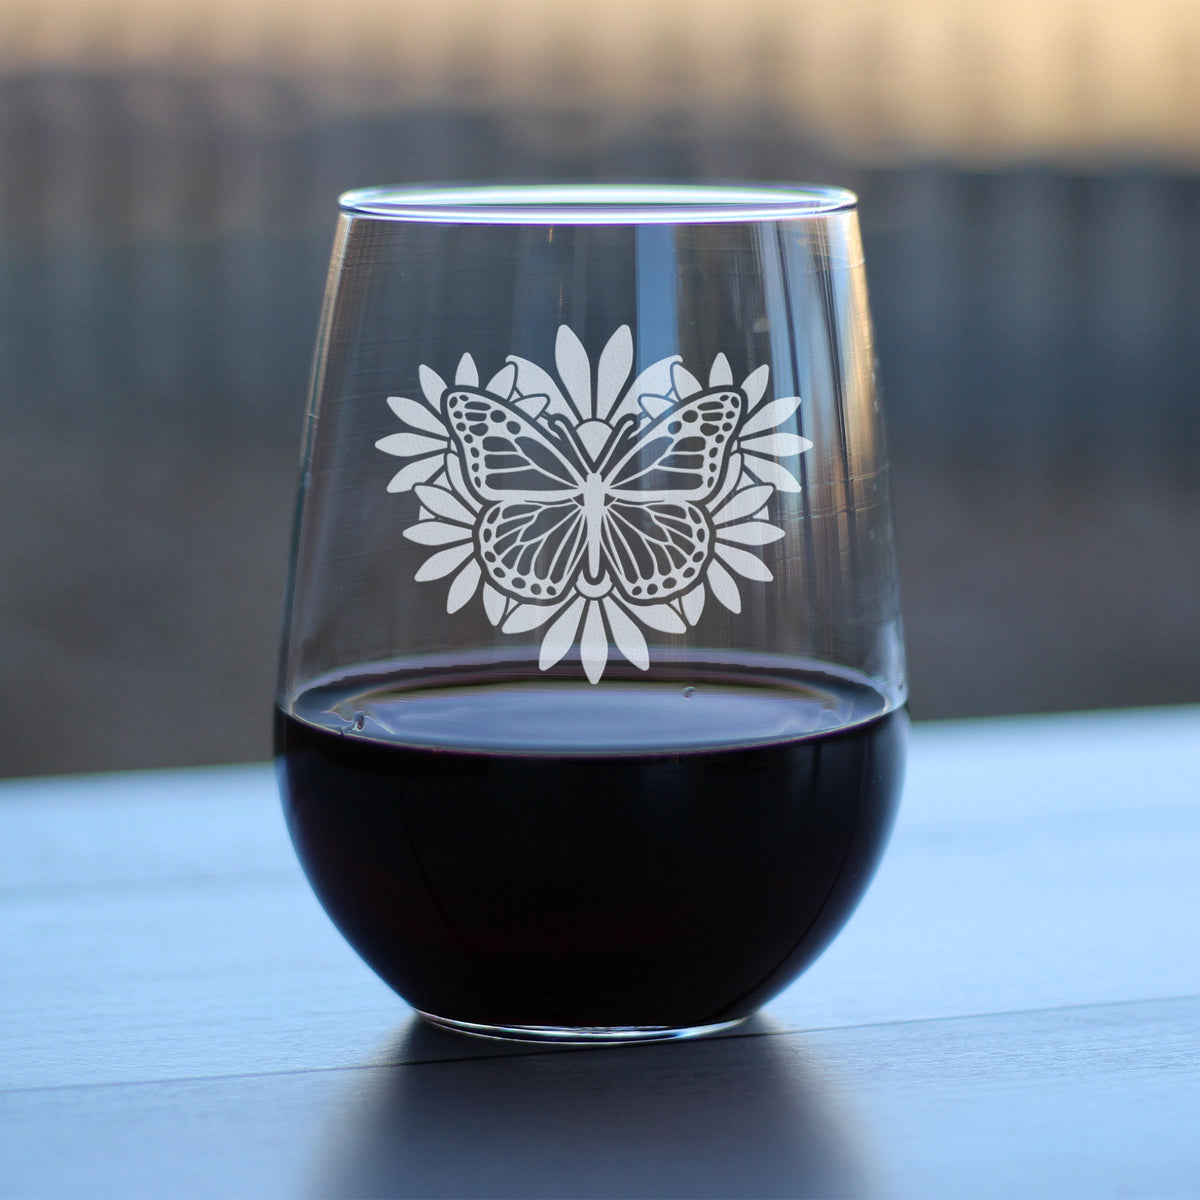 Monarch Butterfly Stemless Wine Glass - Floral Decor and Outdoorsy Gifts for Gardeners - Large 17 Oz Glasses